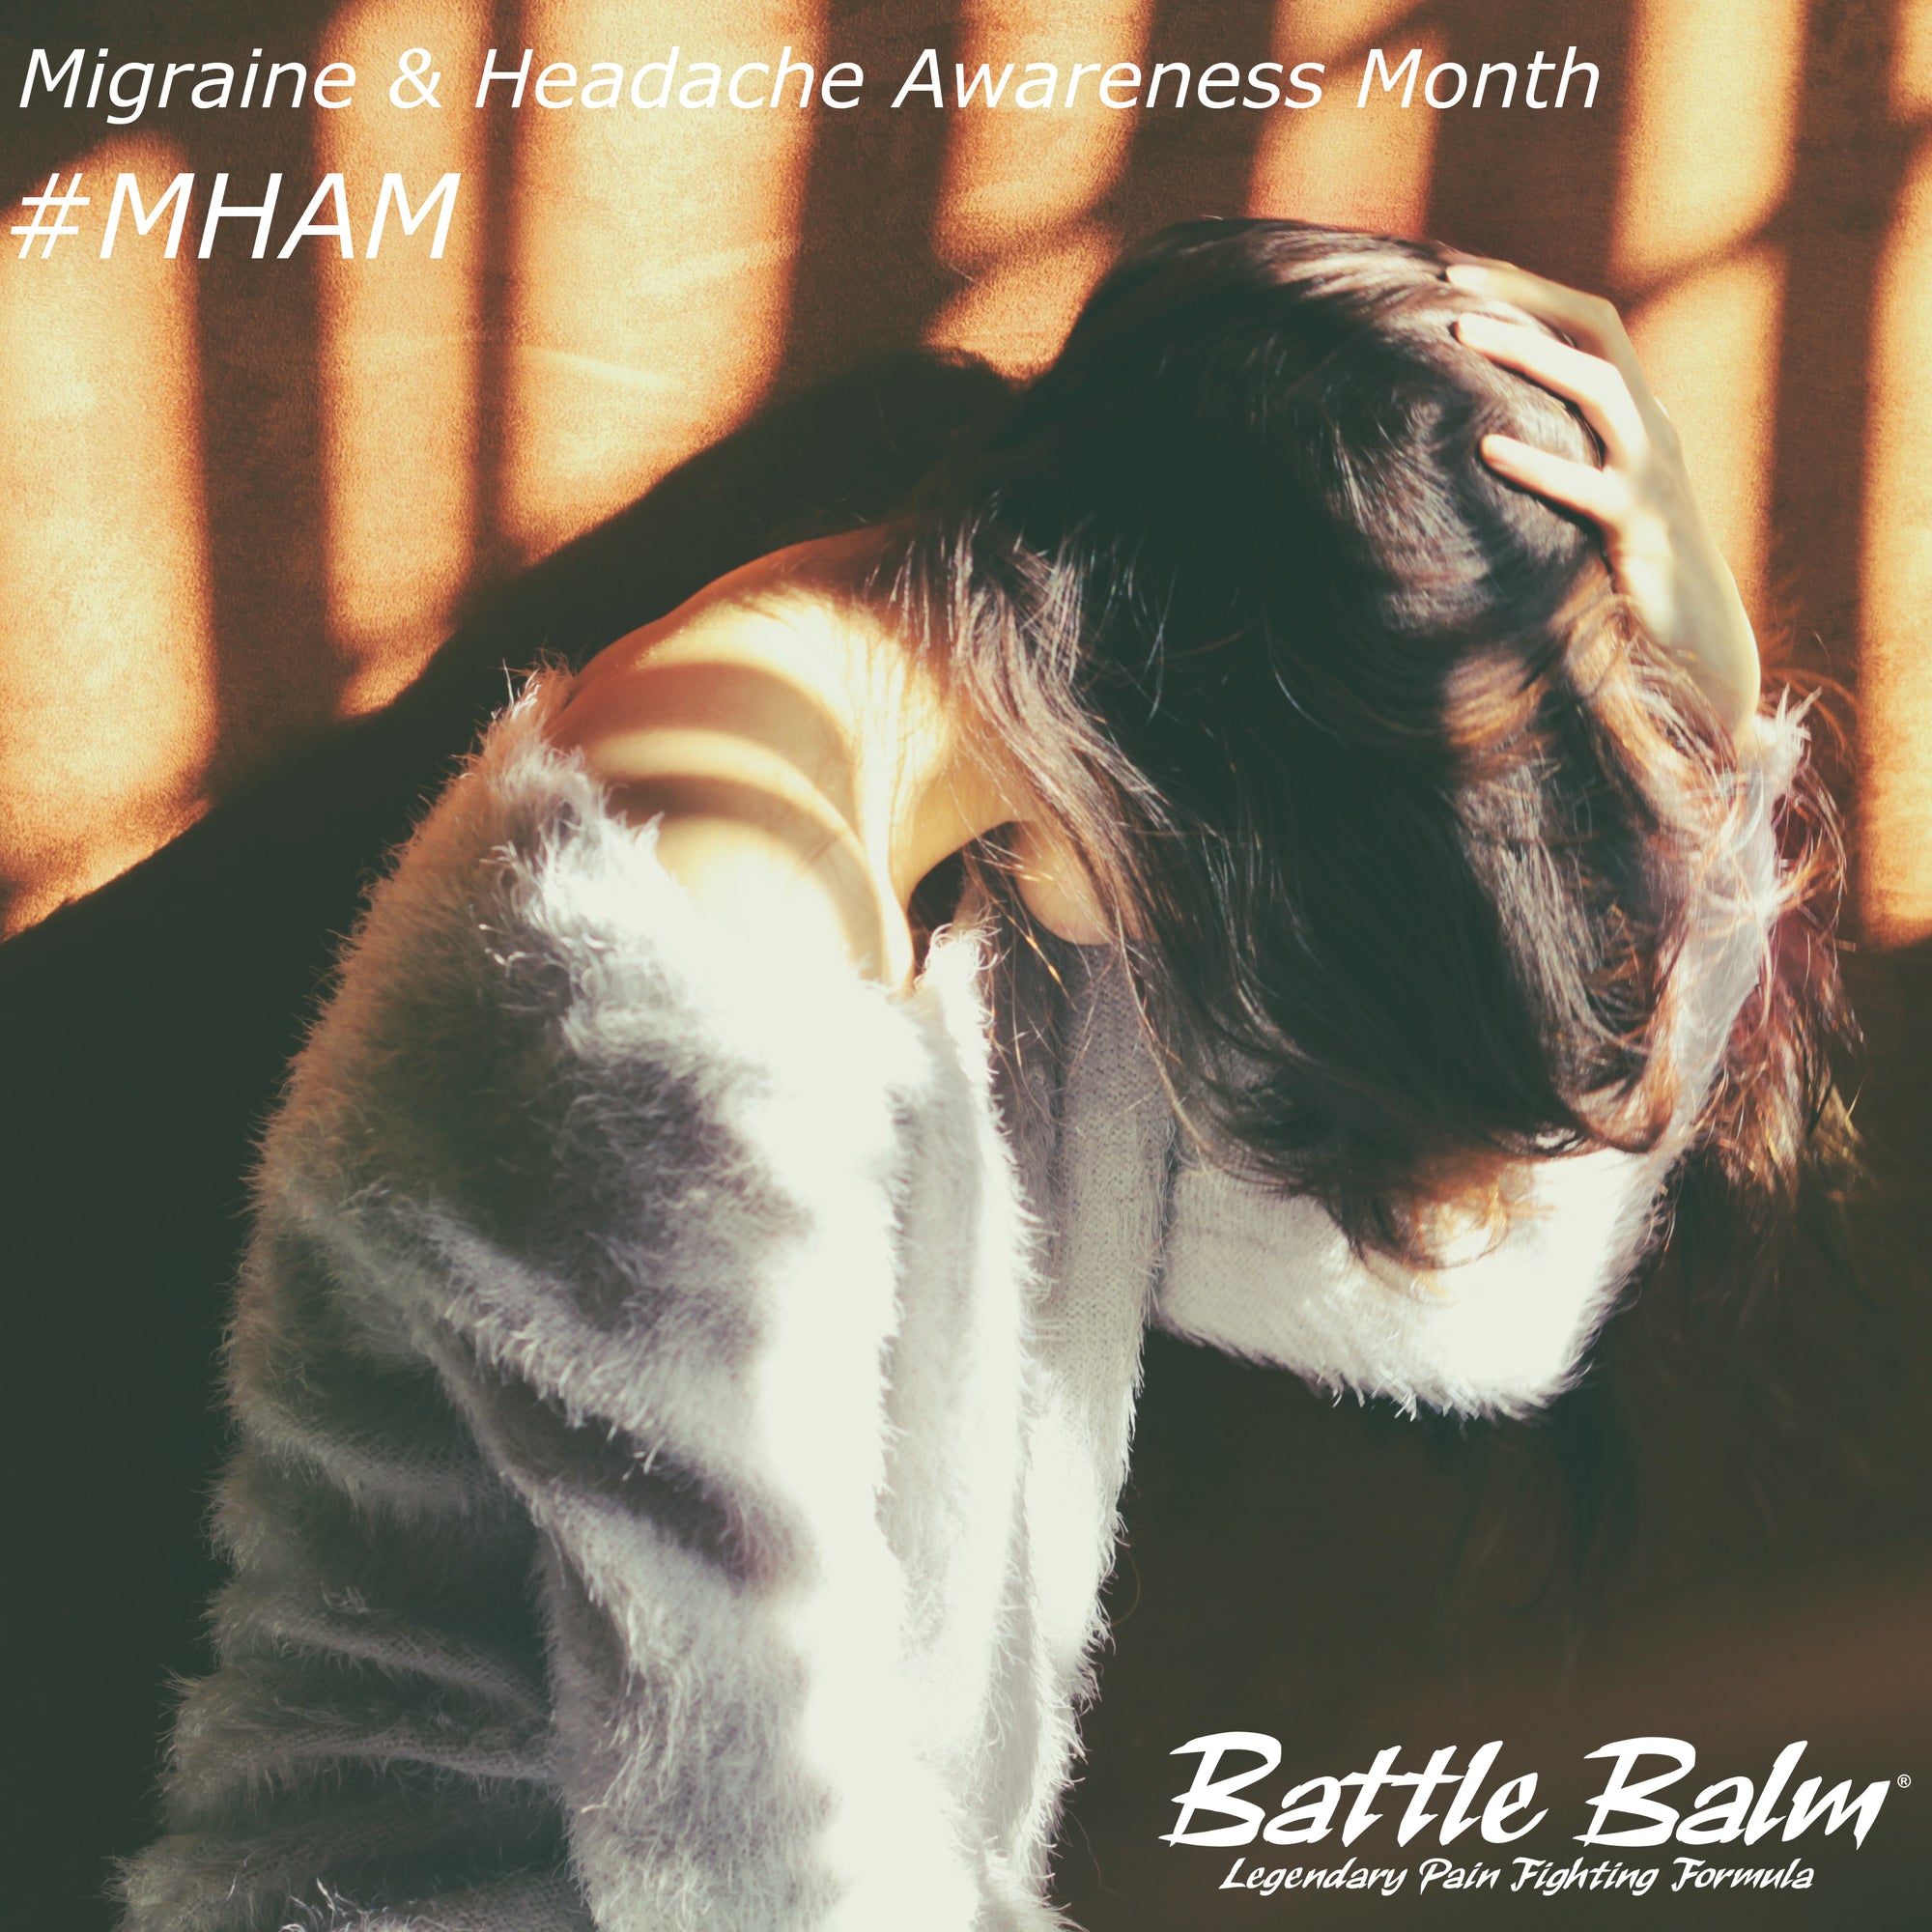 3 Reasons Why Battle Balm is the Best Pain Relief for Migraine Sufferers